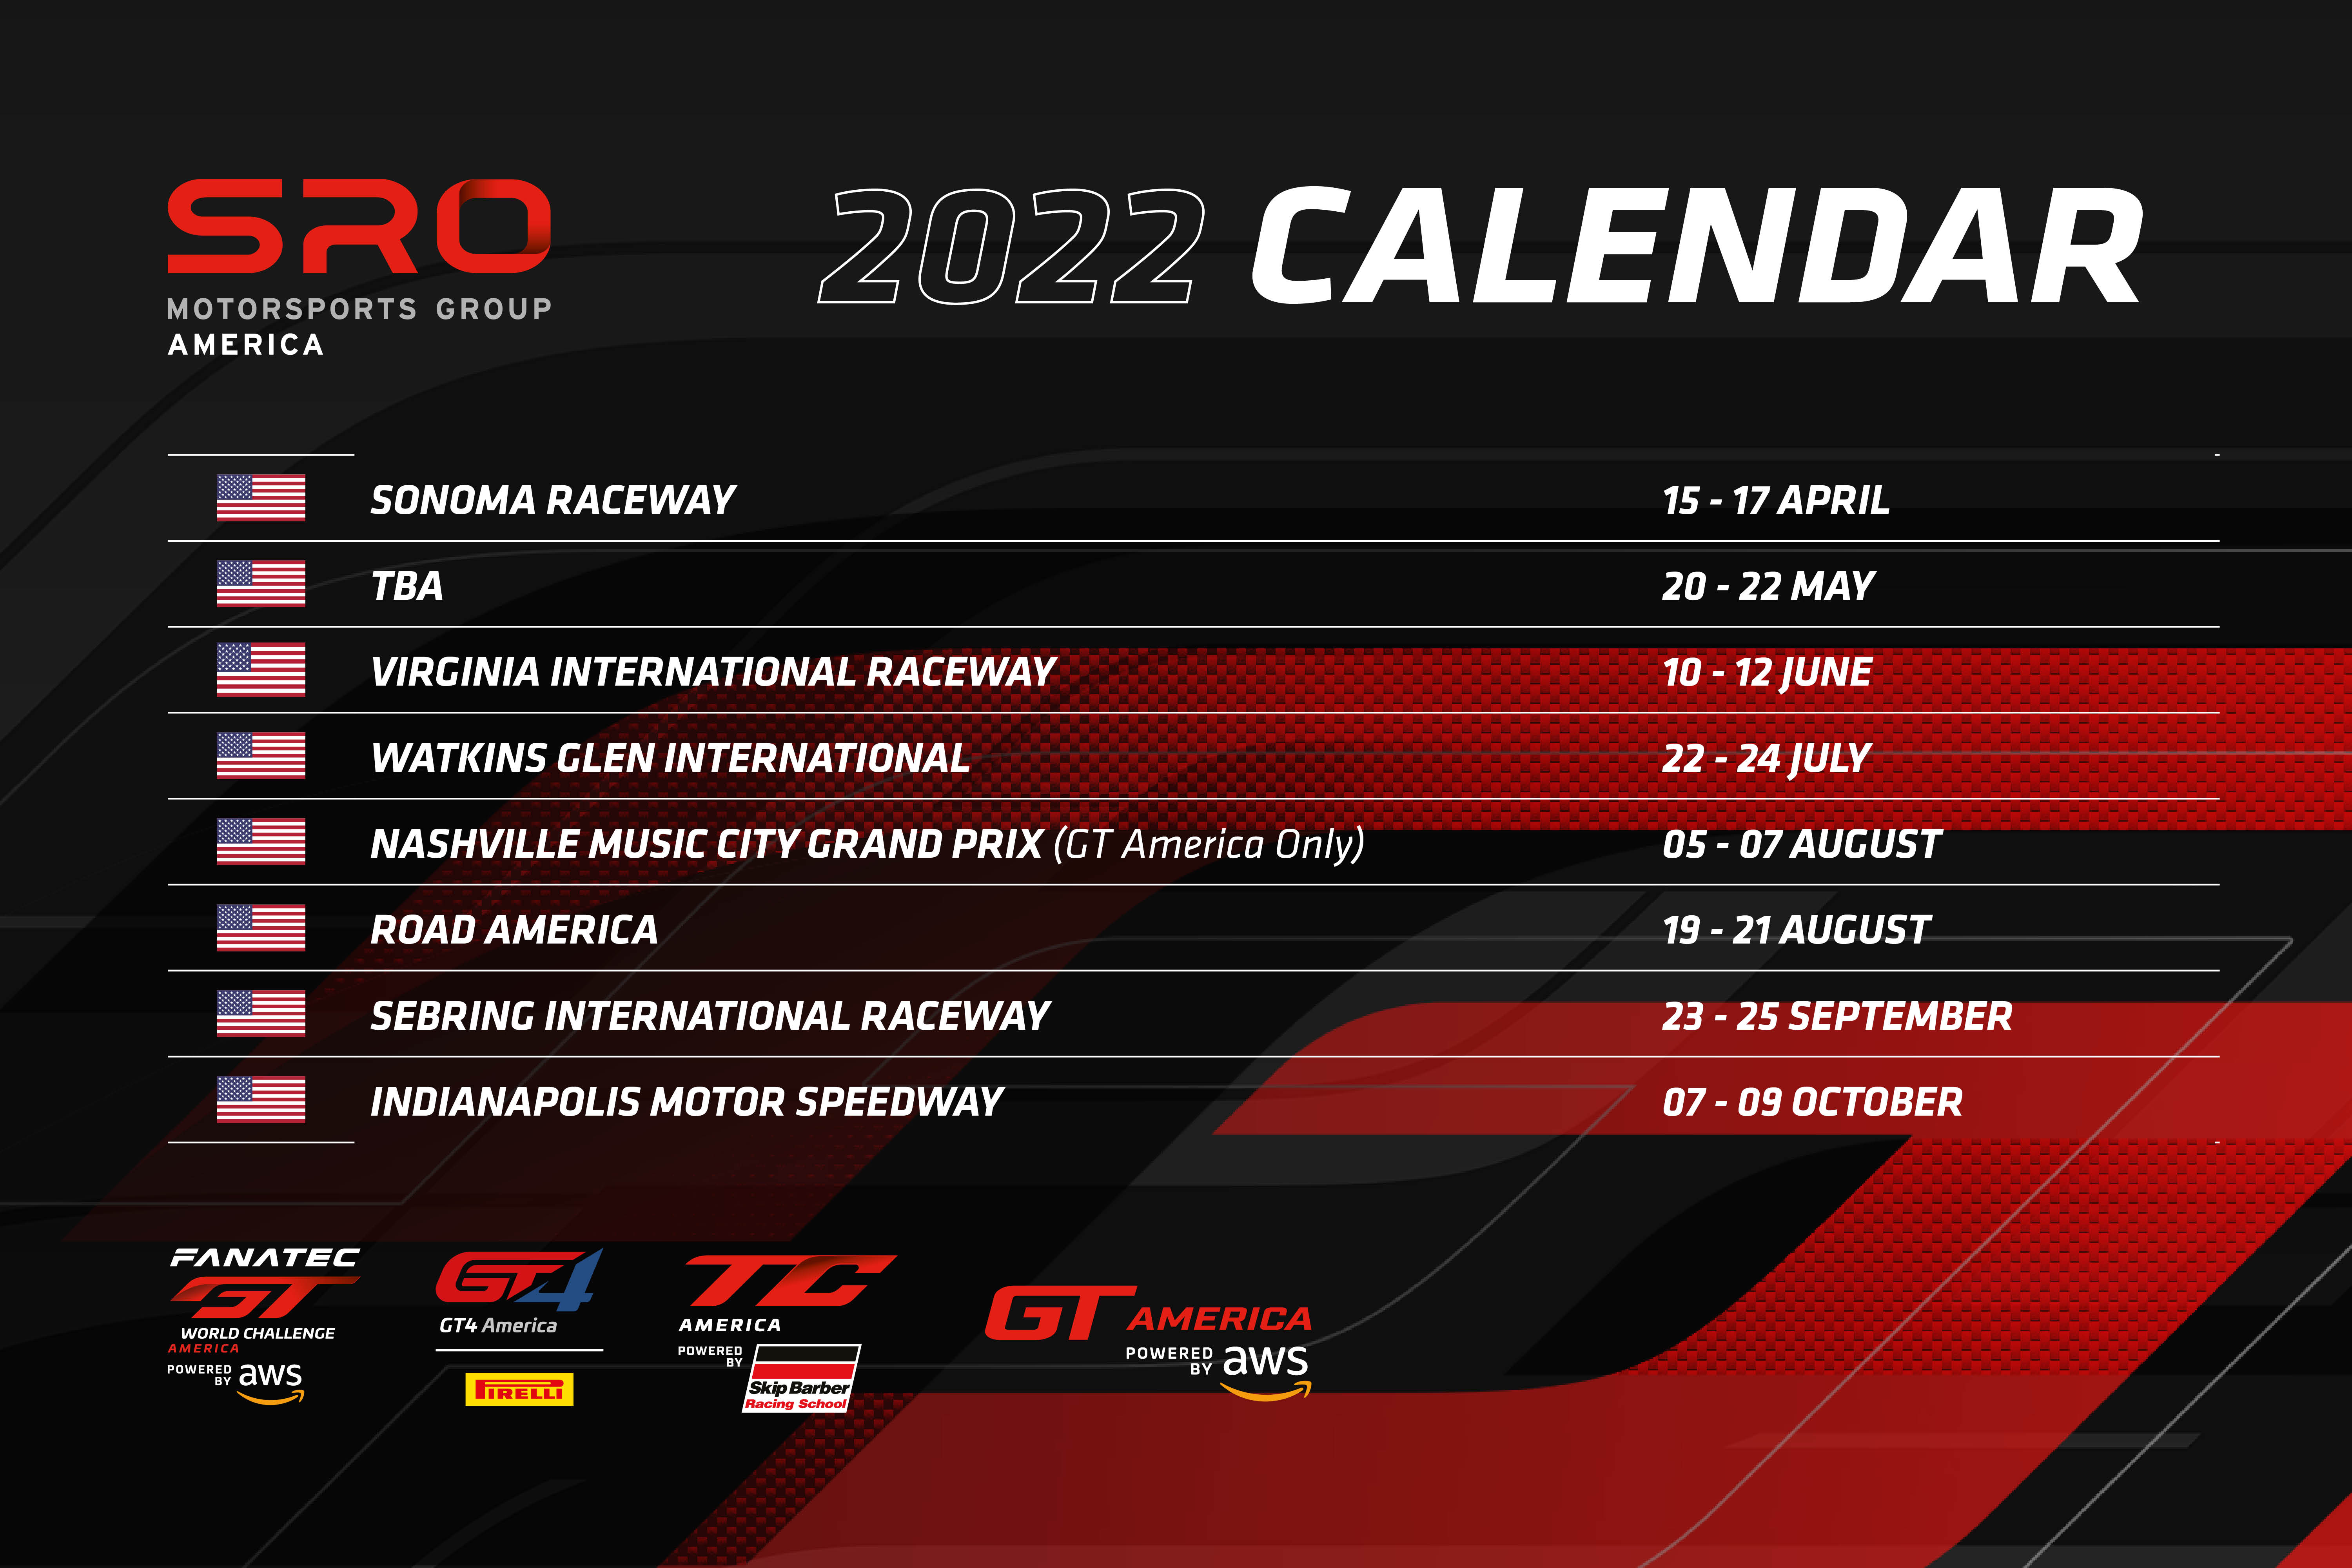 european-and-american-series-among-first-set-of-2022-calendars-confirmed-by-sro-motorsports